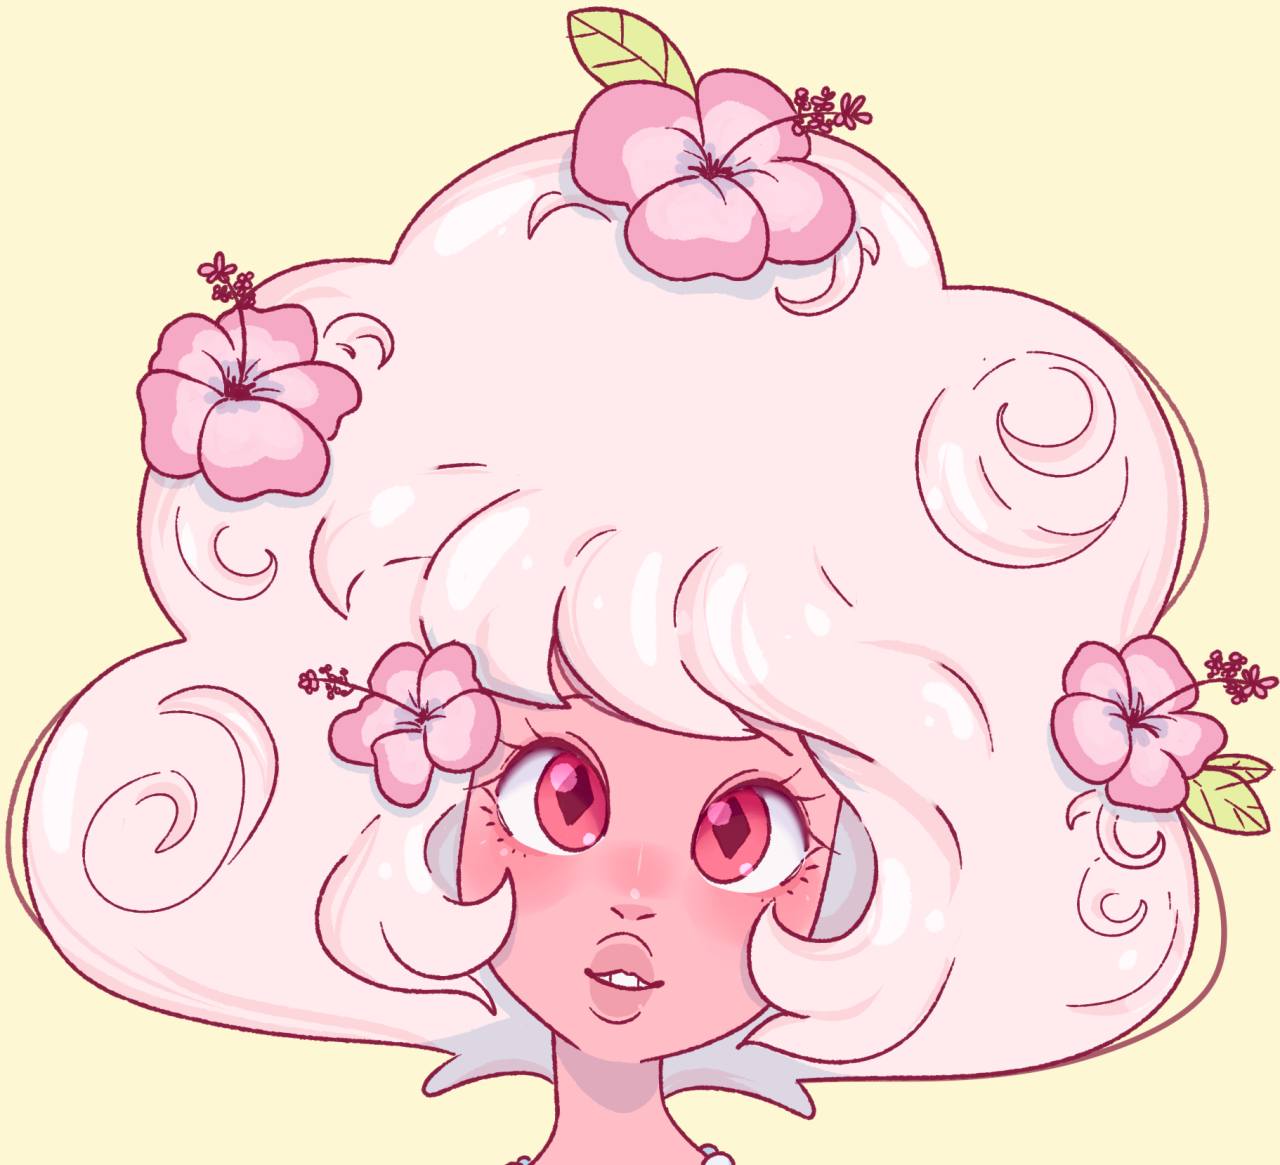 Got inspired by some fancy pink diamonds and decided to give it a shot💖💖